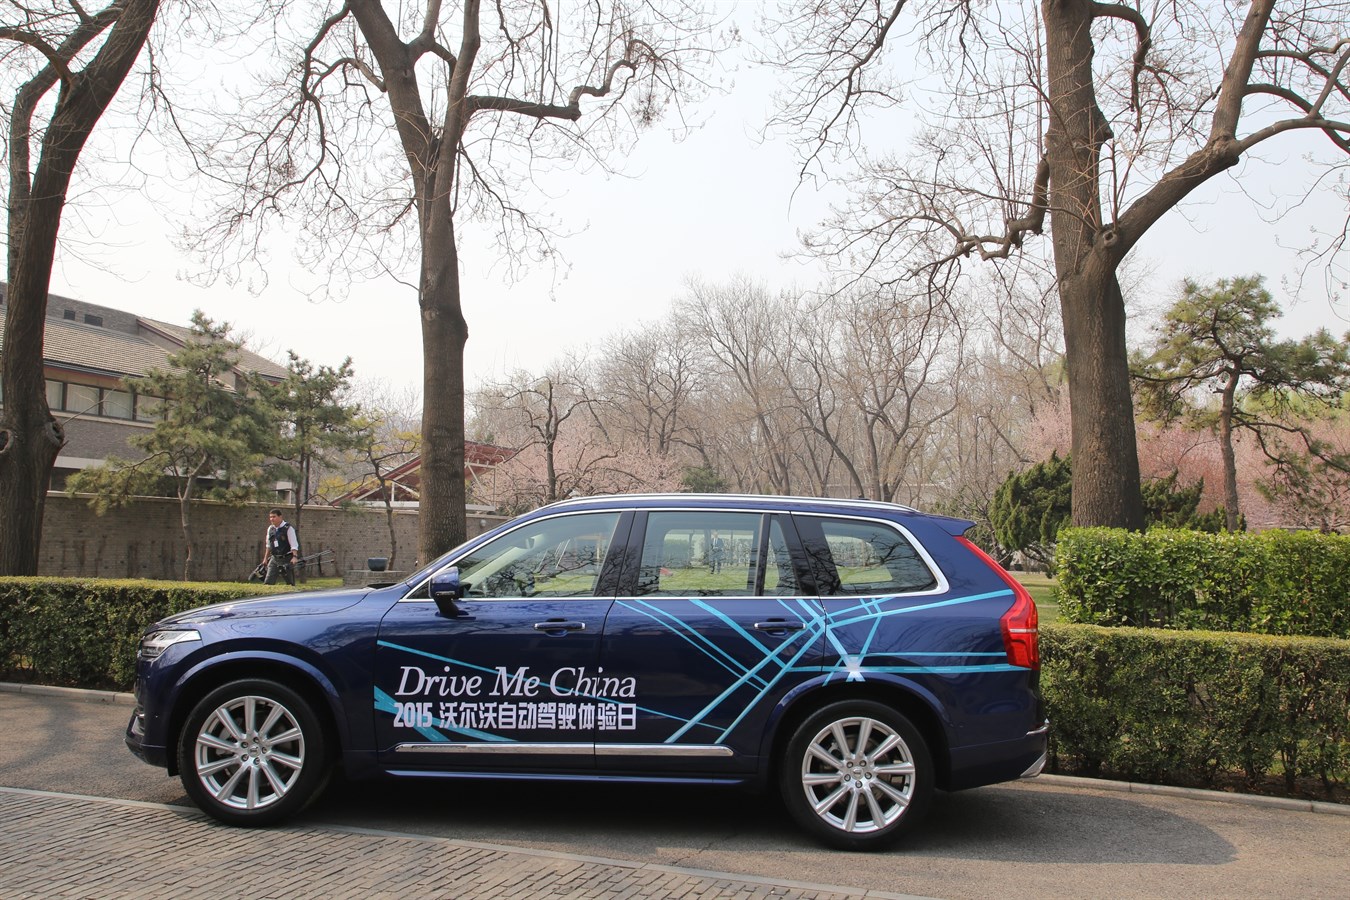 Volvo XC90 with Drive Me striping at Volvo Cars’ demonstration of self-driving cars in Beijing